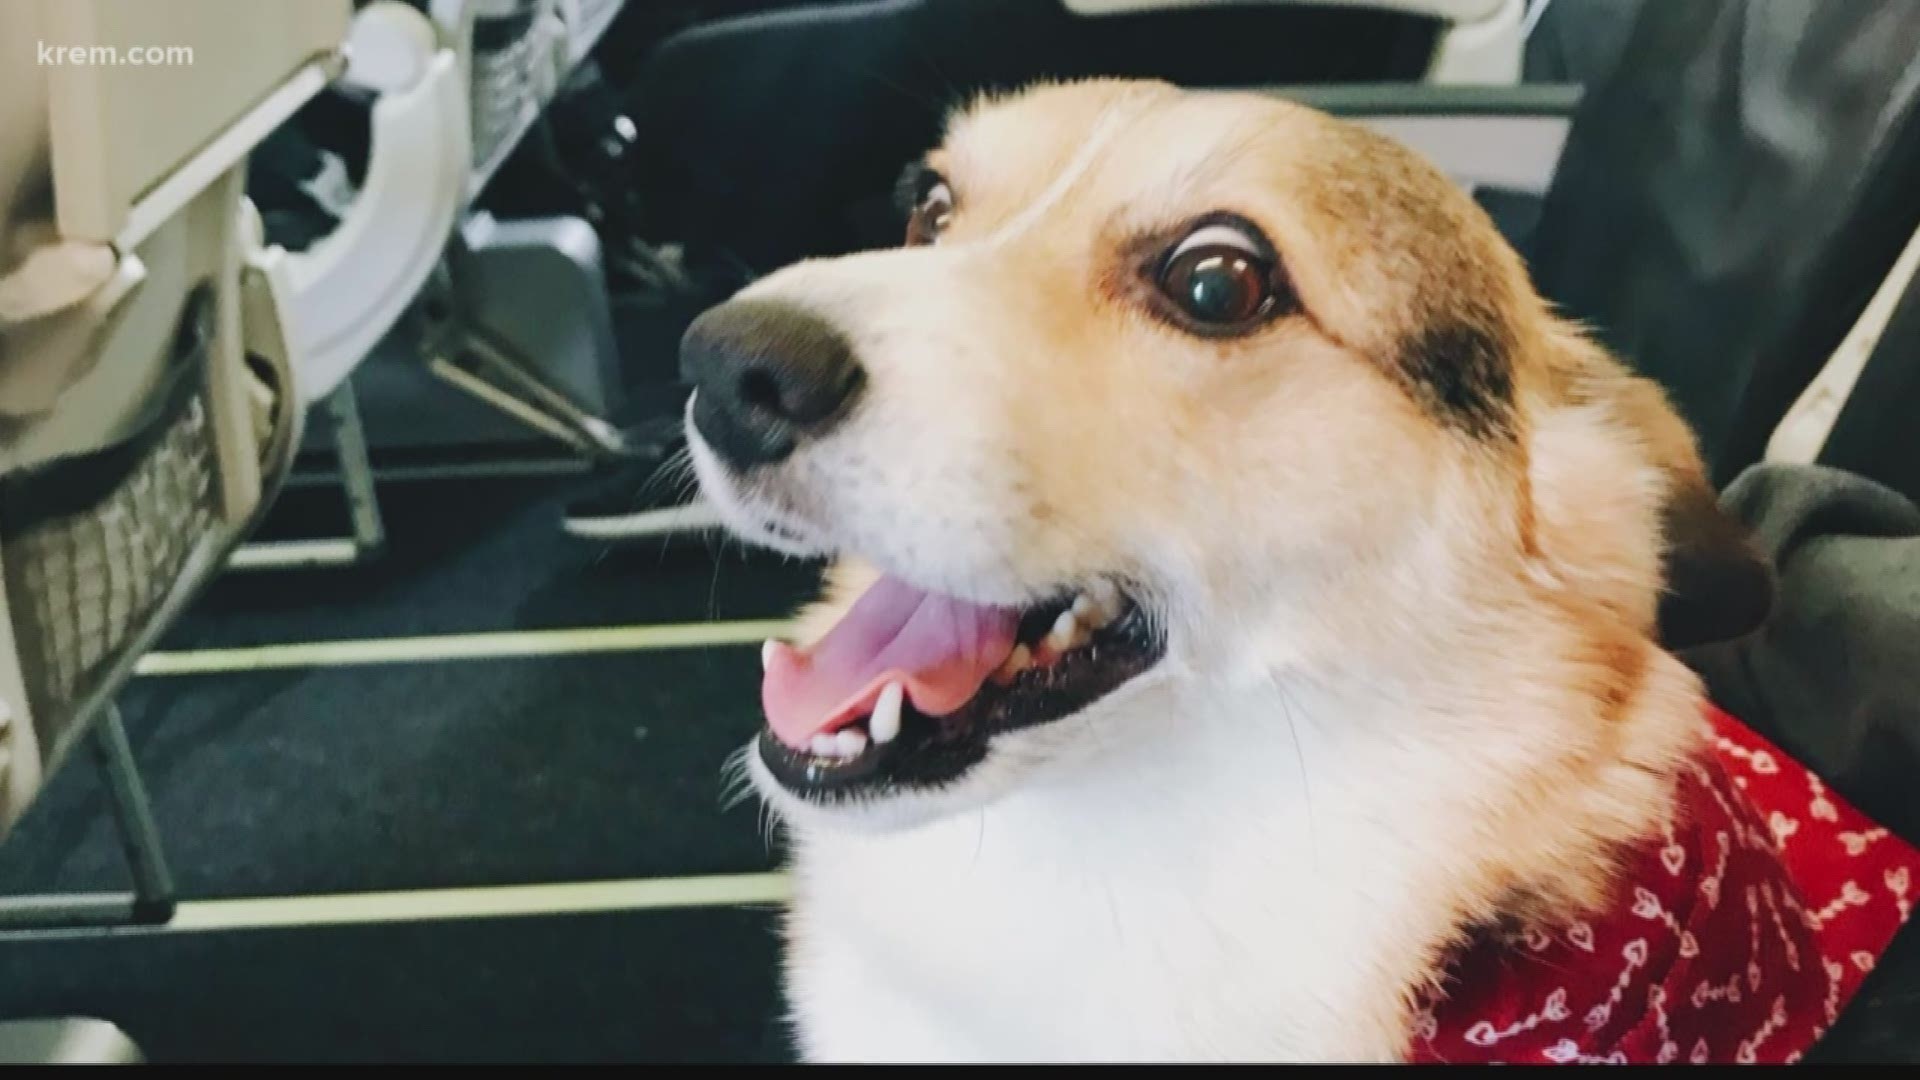 One corgi from Coeur d'Alene is internet famous after cheering up a stranger at the SEA TAC airport! (2-22-18)